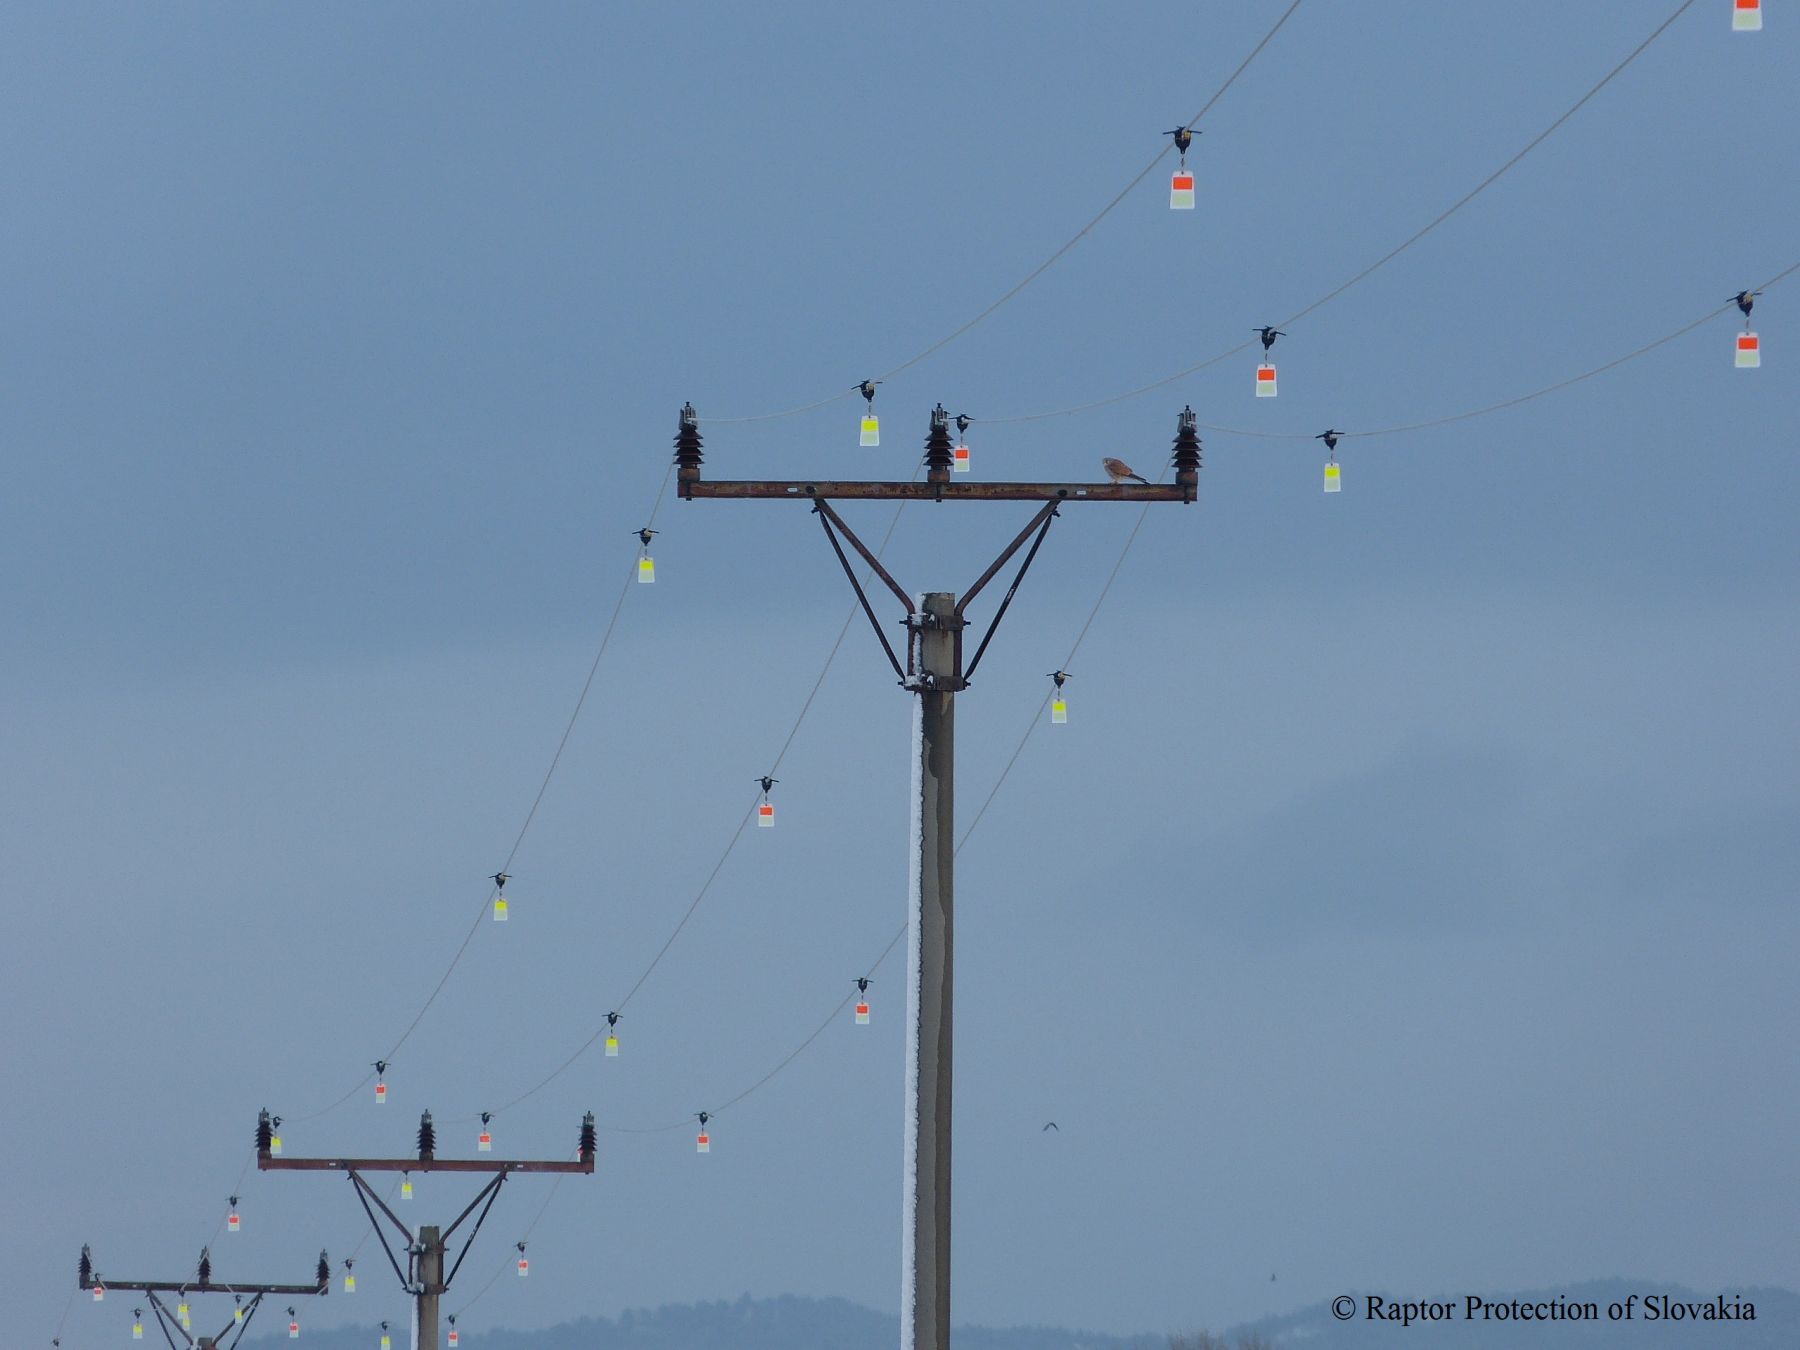 Power lines with firefly flight diverters installed, with a small bird sitting on the utility pole